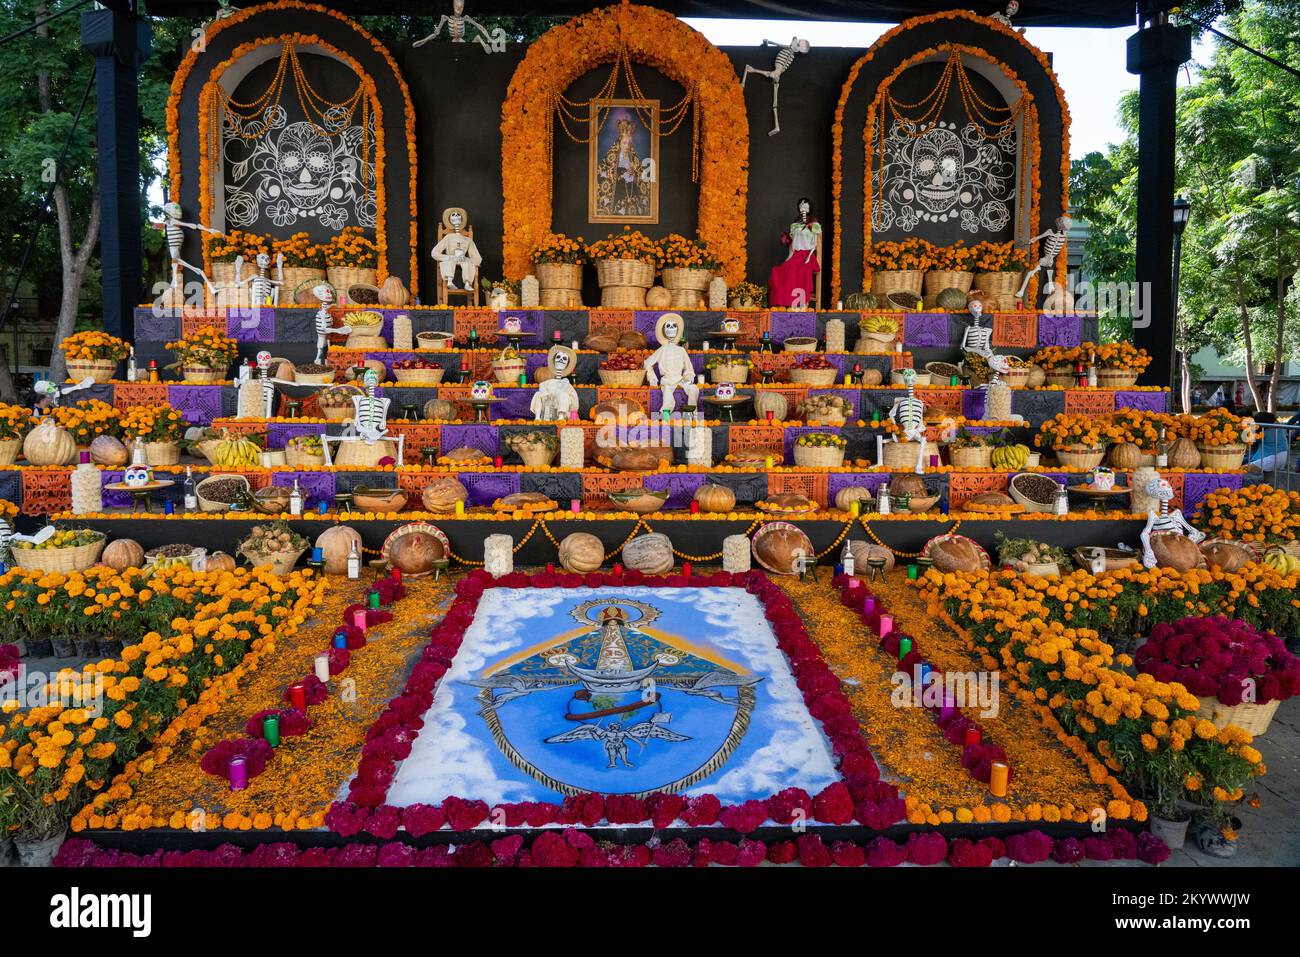 A large ofrenda in the Zocalo in front of the Metropolitan Cathedral to celebrate Day of the Dead in Oaxaca, Mexico. Stock Photo